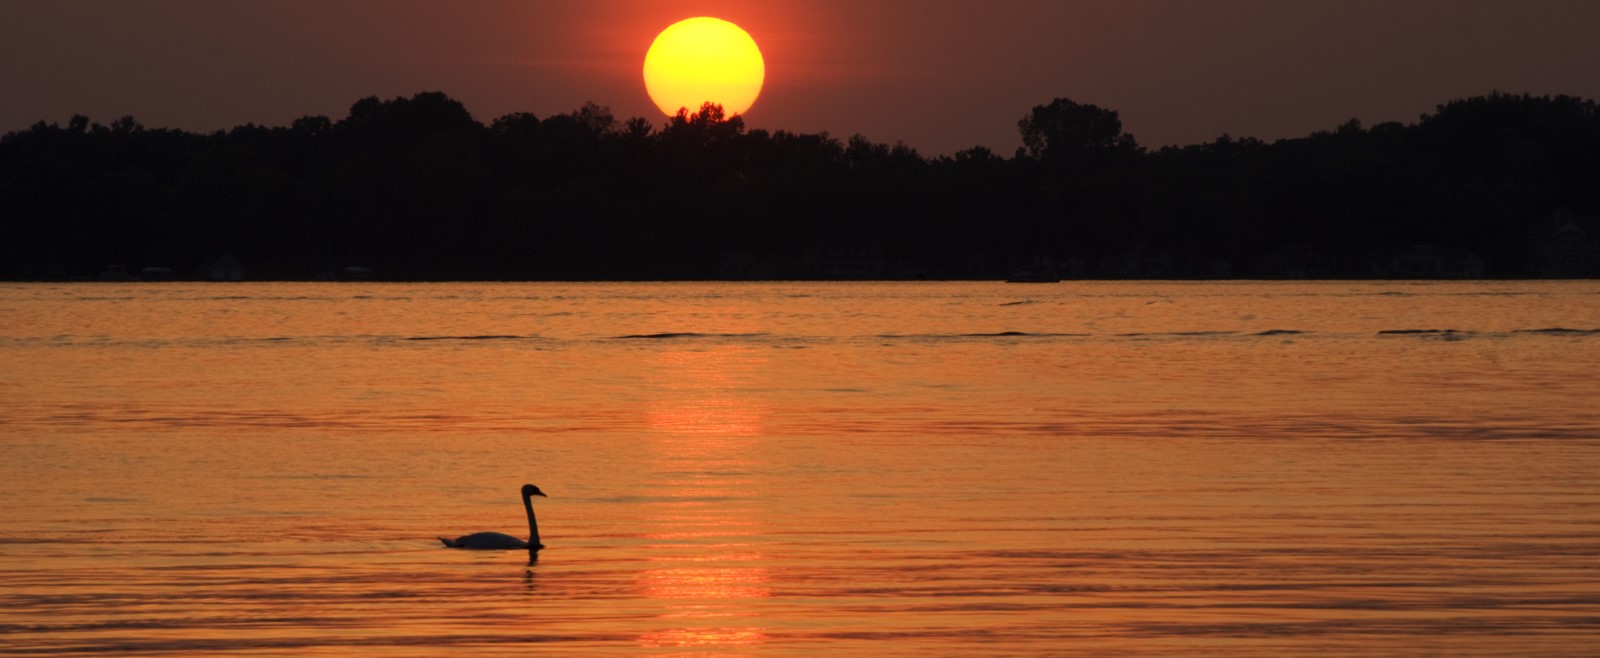 a bird swimming on a lake with the sunsetting